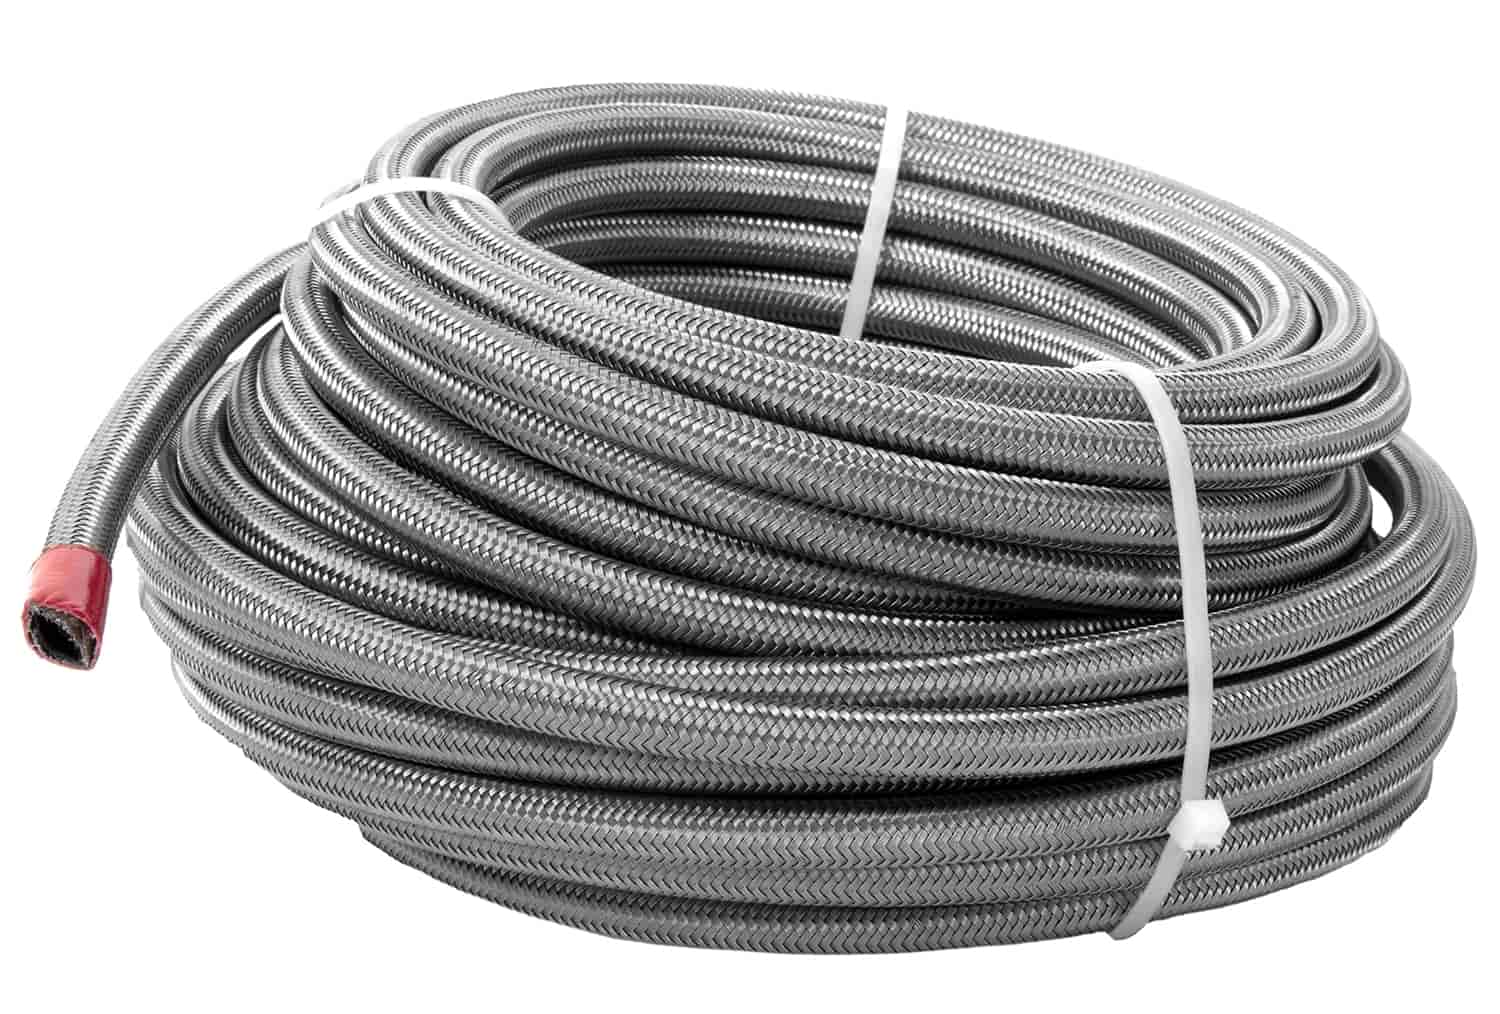 Braided Stainless Steel PTFE Fuel Hose -6 AN x 4 ft